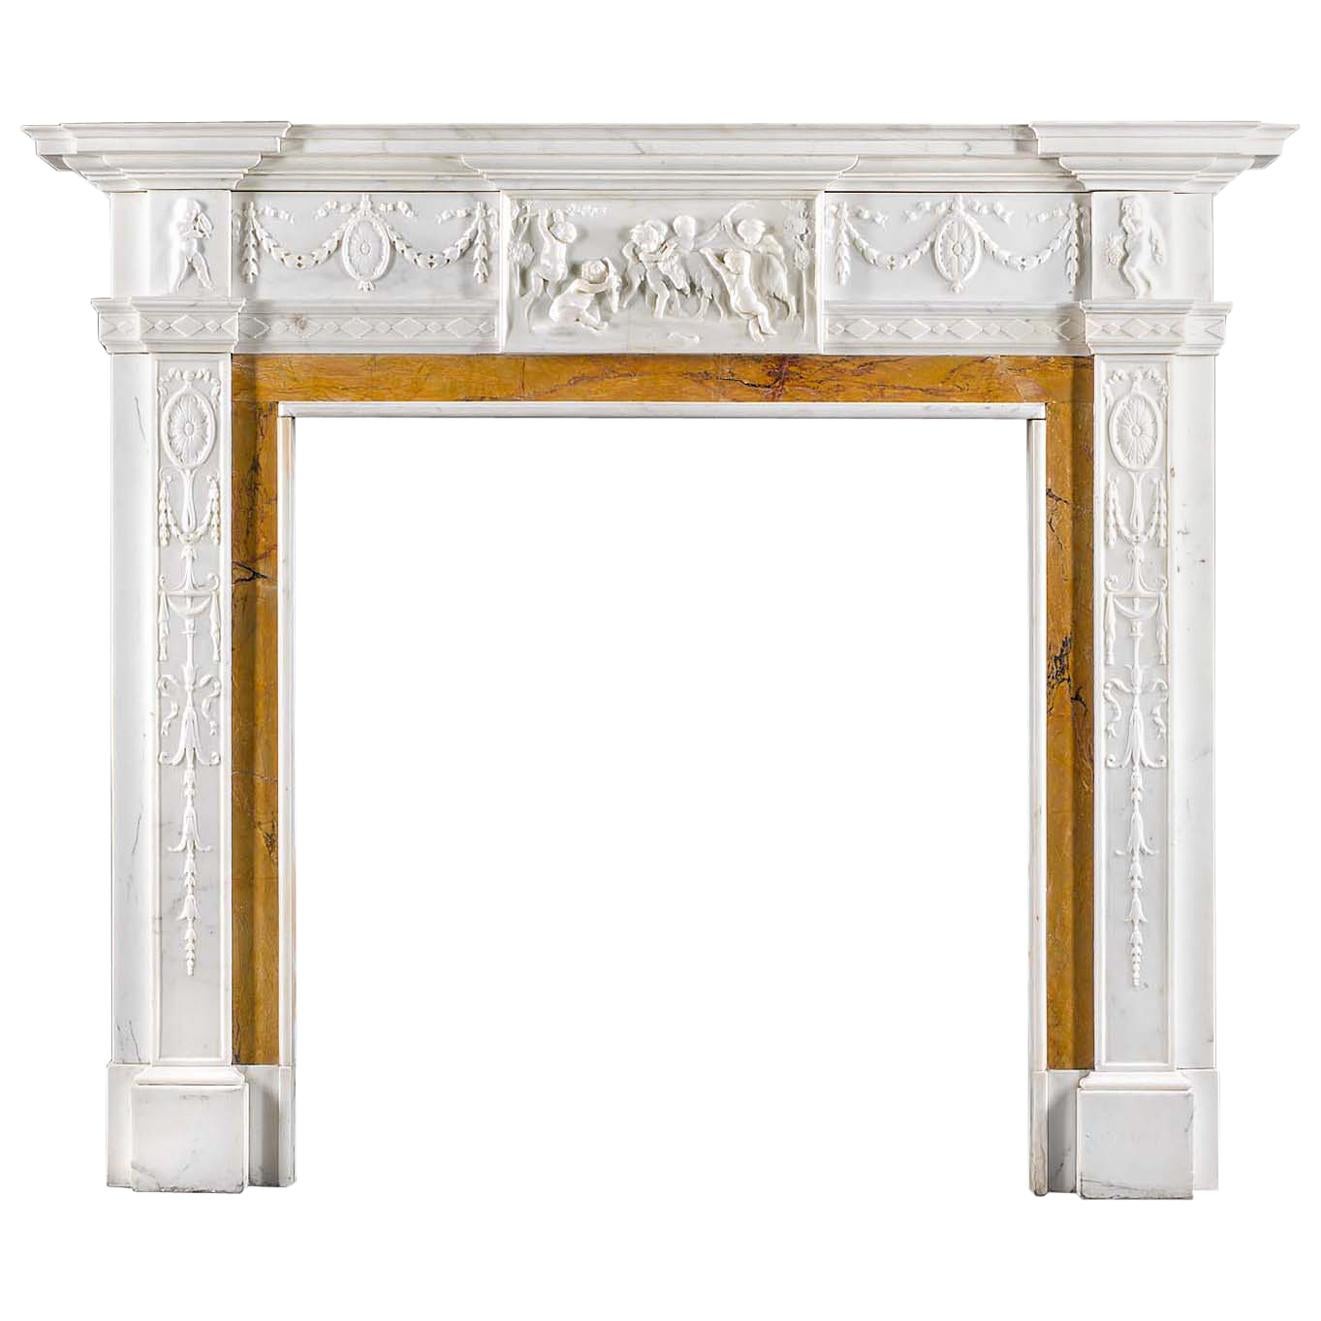 Neoclassical Style Fireplace in Statuary and Sienna Marble